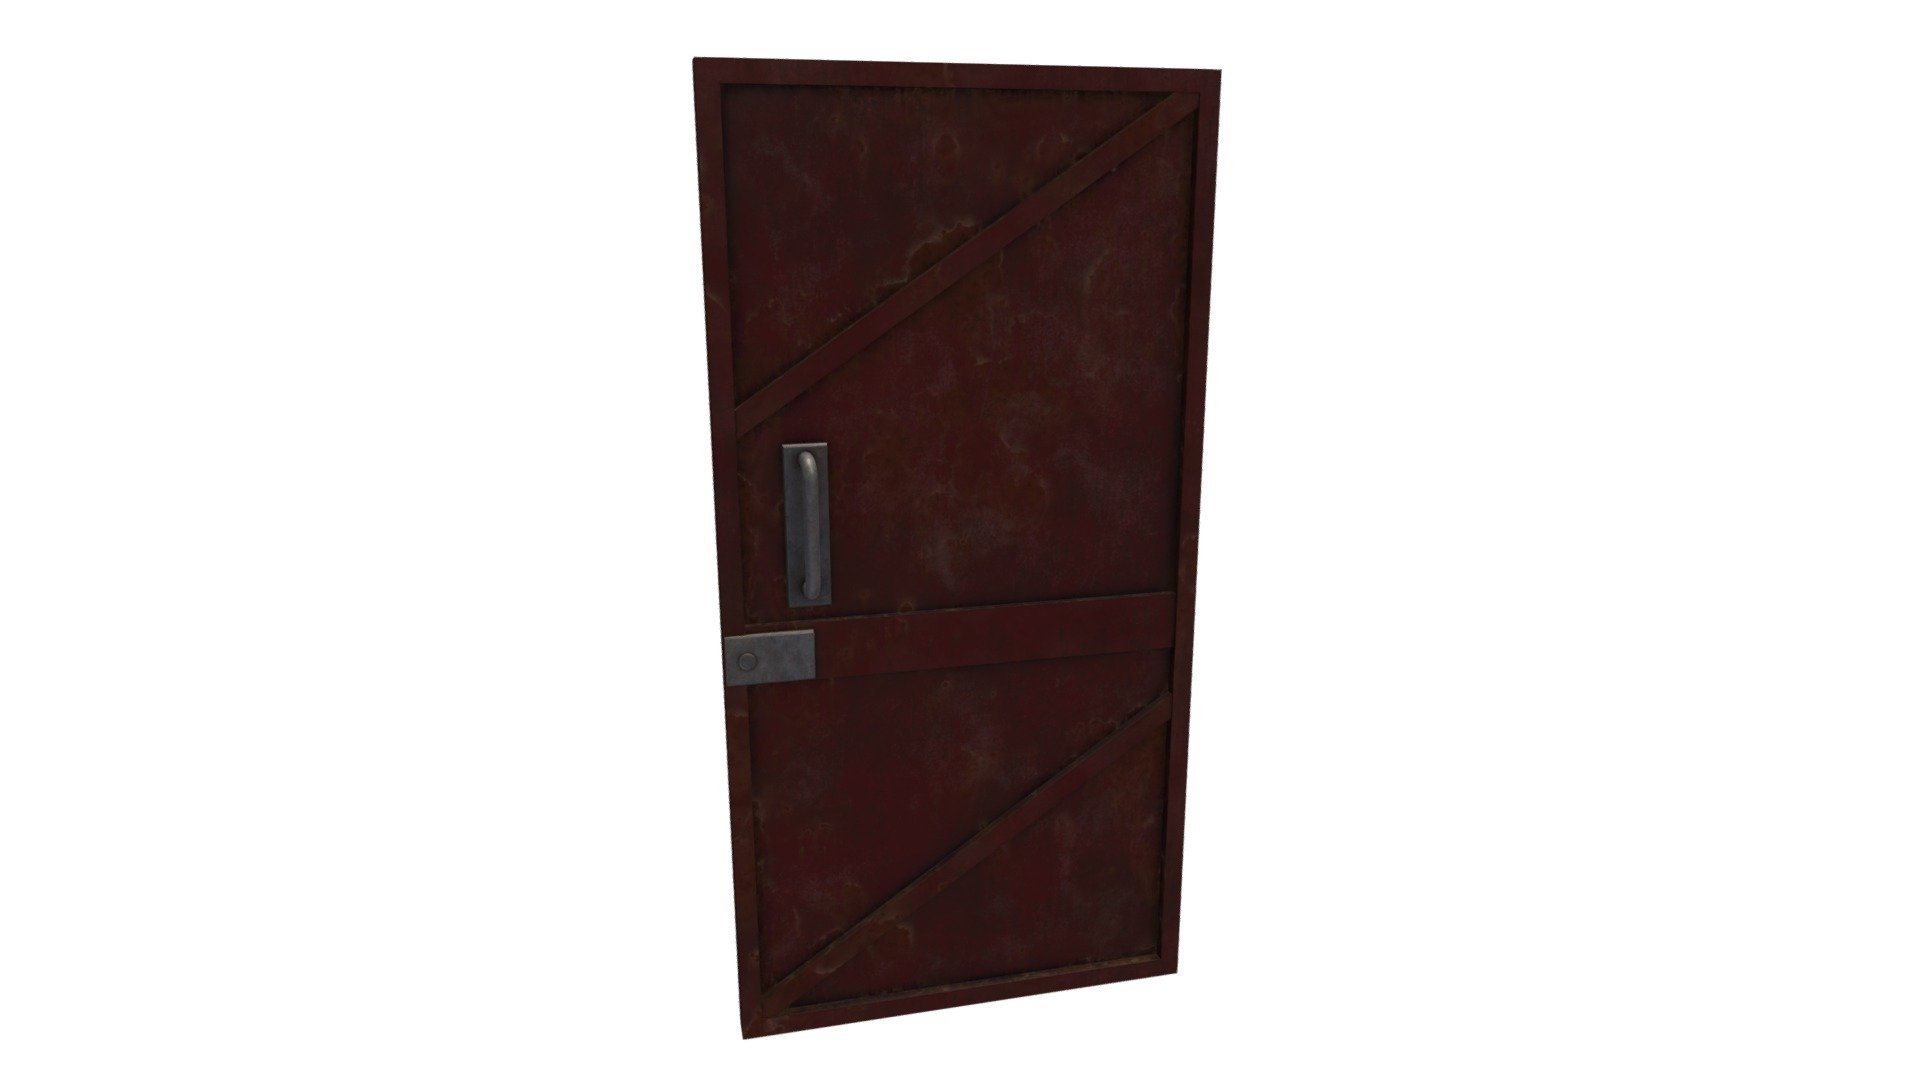 Industrial rusty door. Feel free to use it in your scenes if you want. Model in OBJ format, with UV Map. Modeled in Blender 3D. By Skript47 3d model